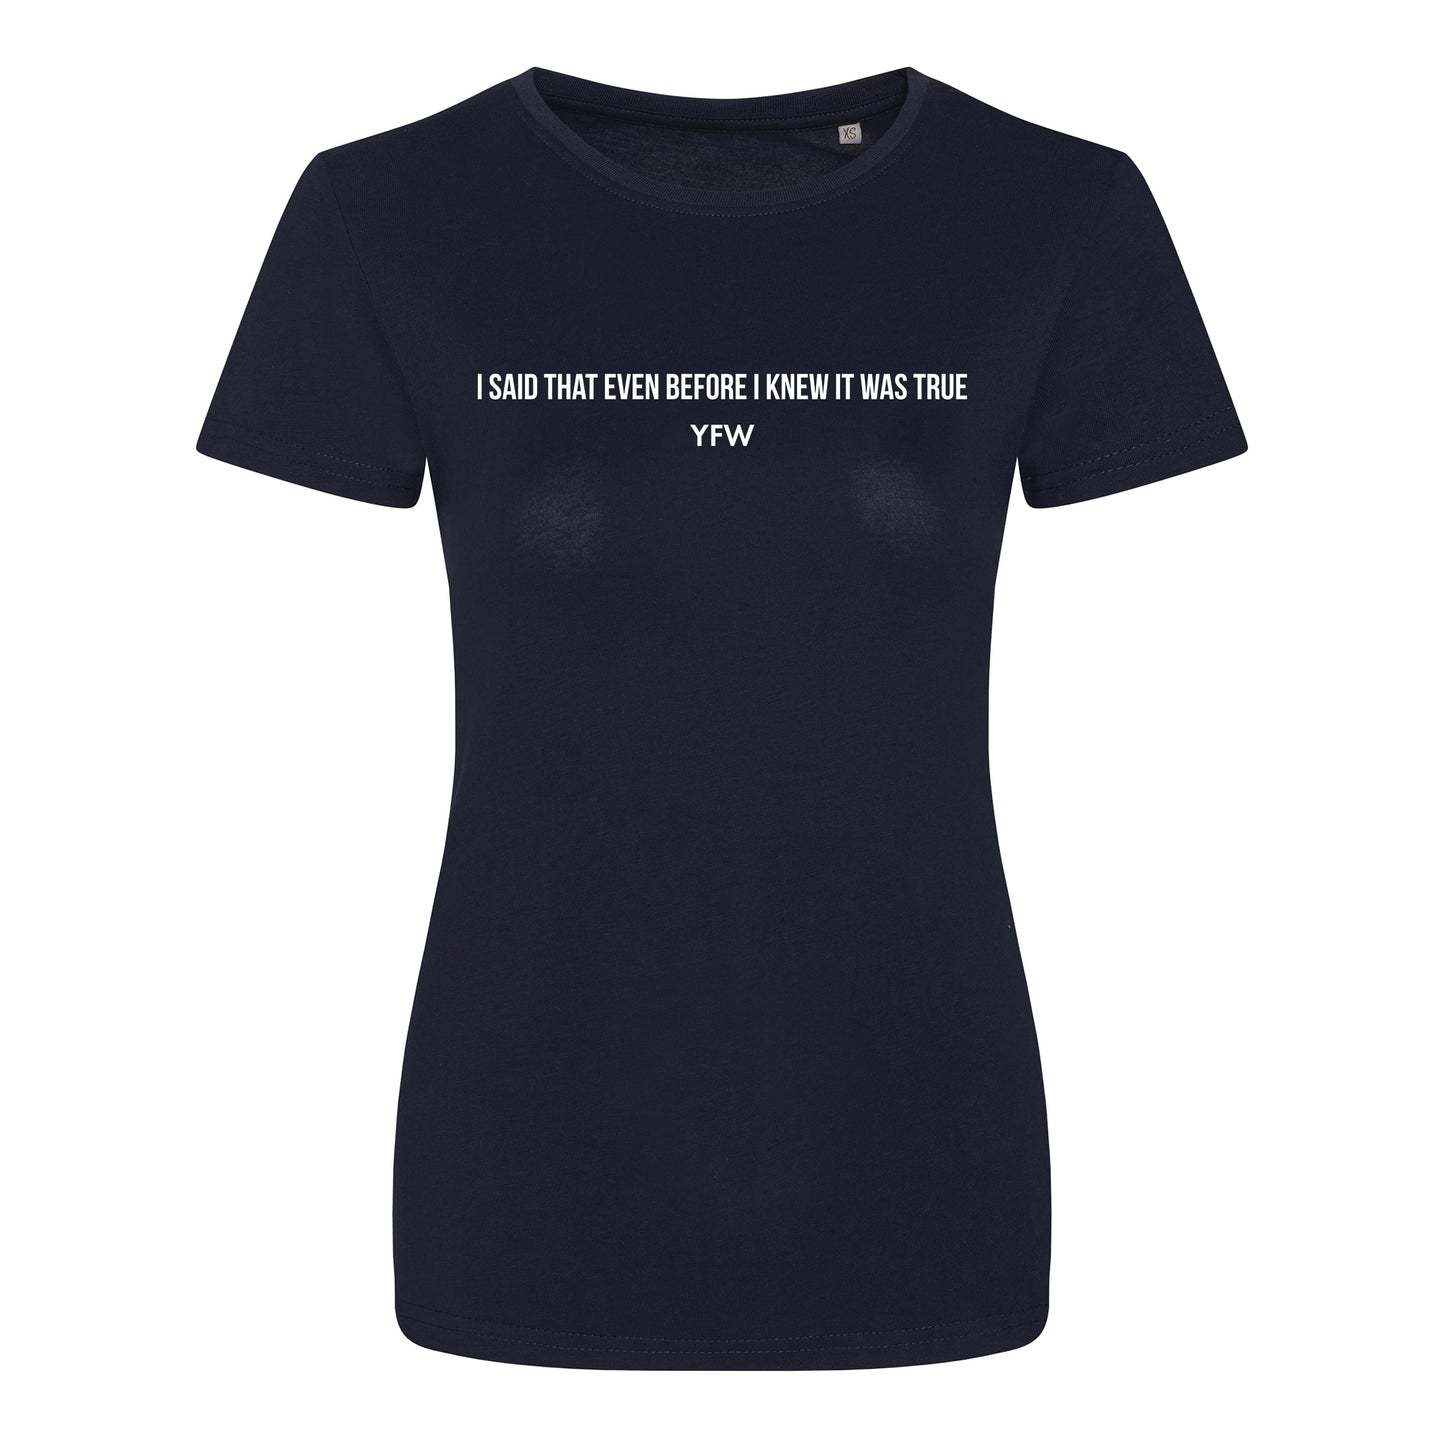 'I said that even before I knew it was true' Cinch Navy Tee